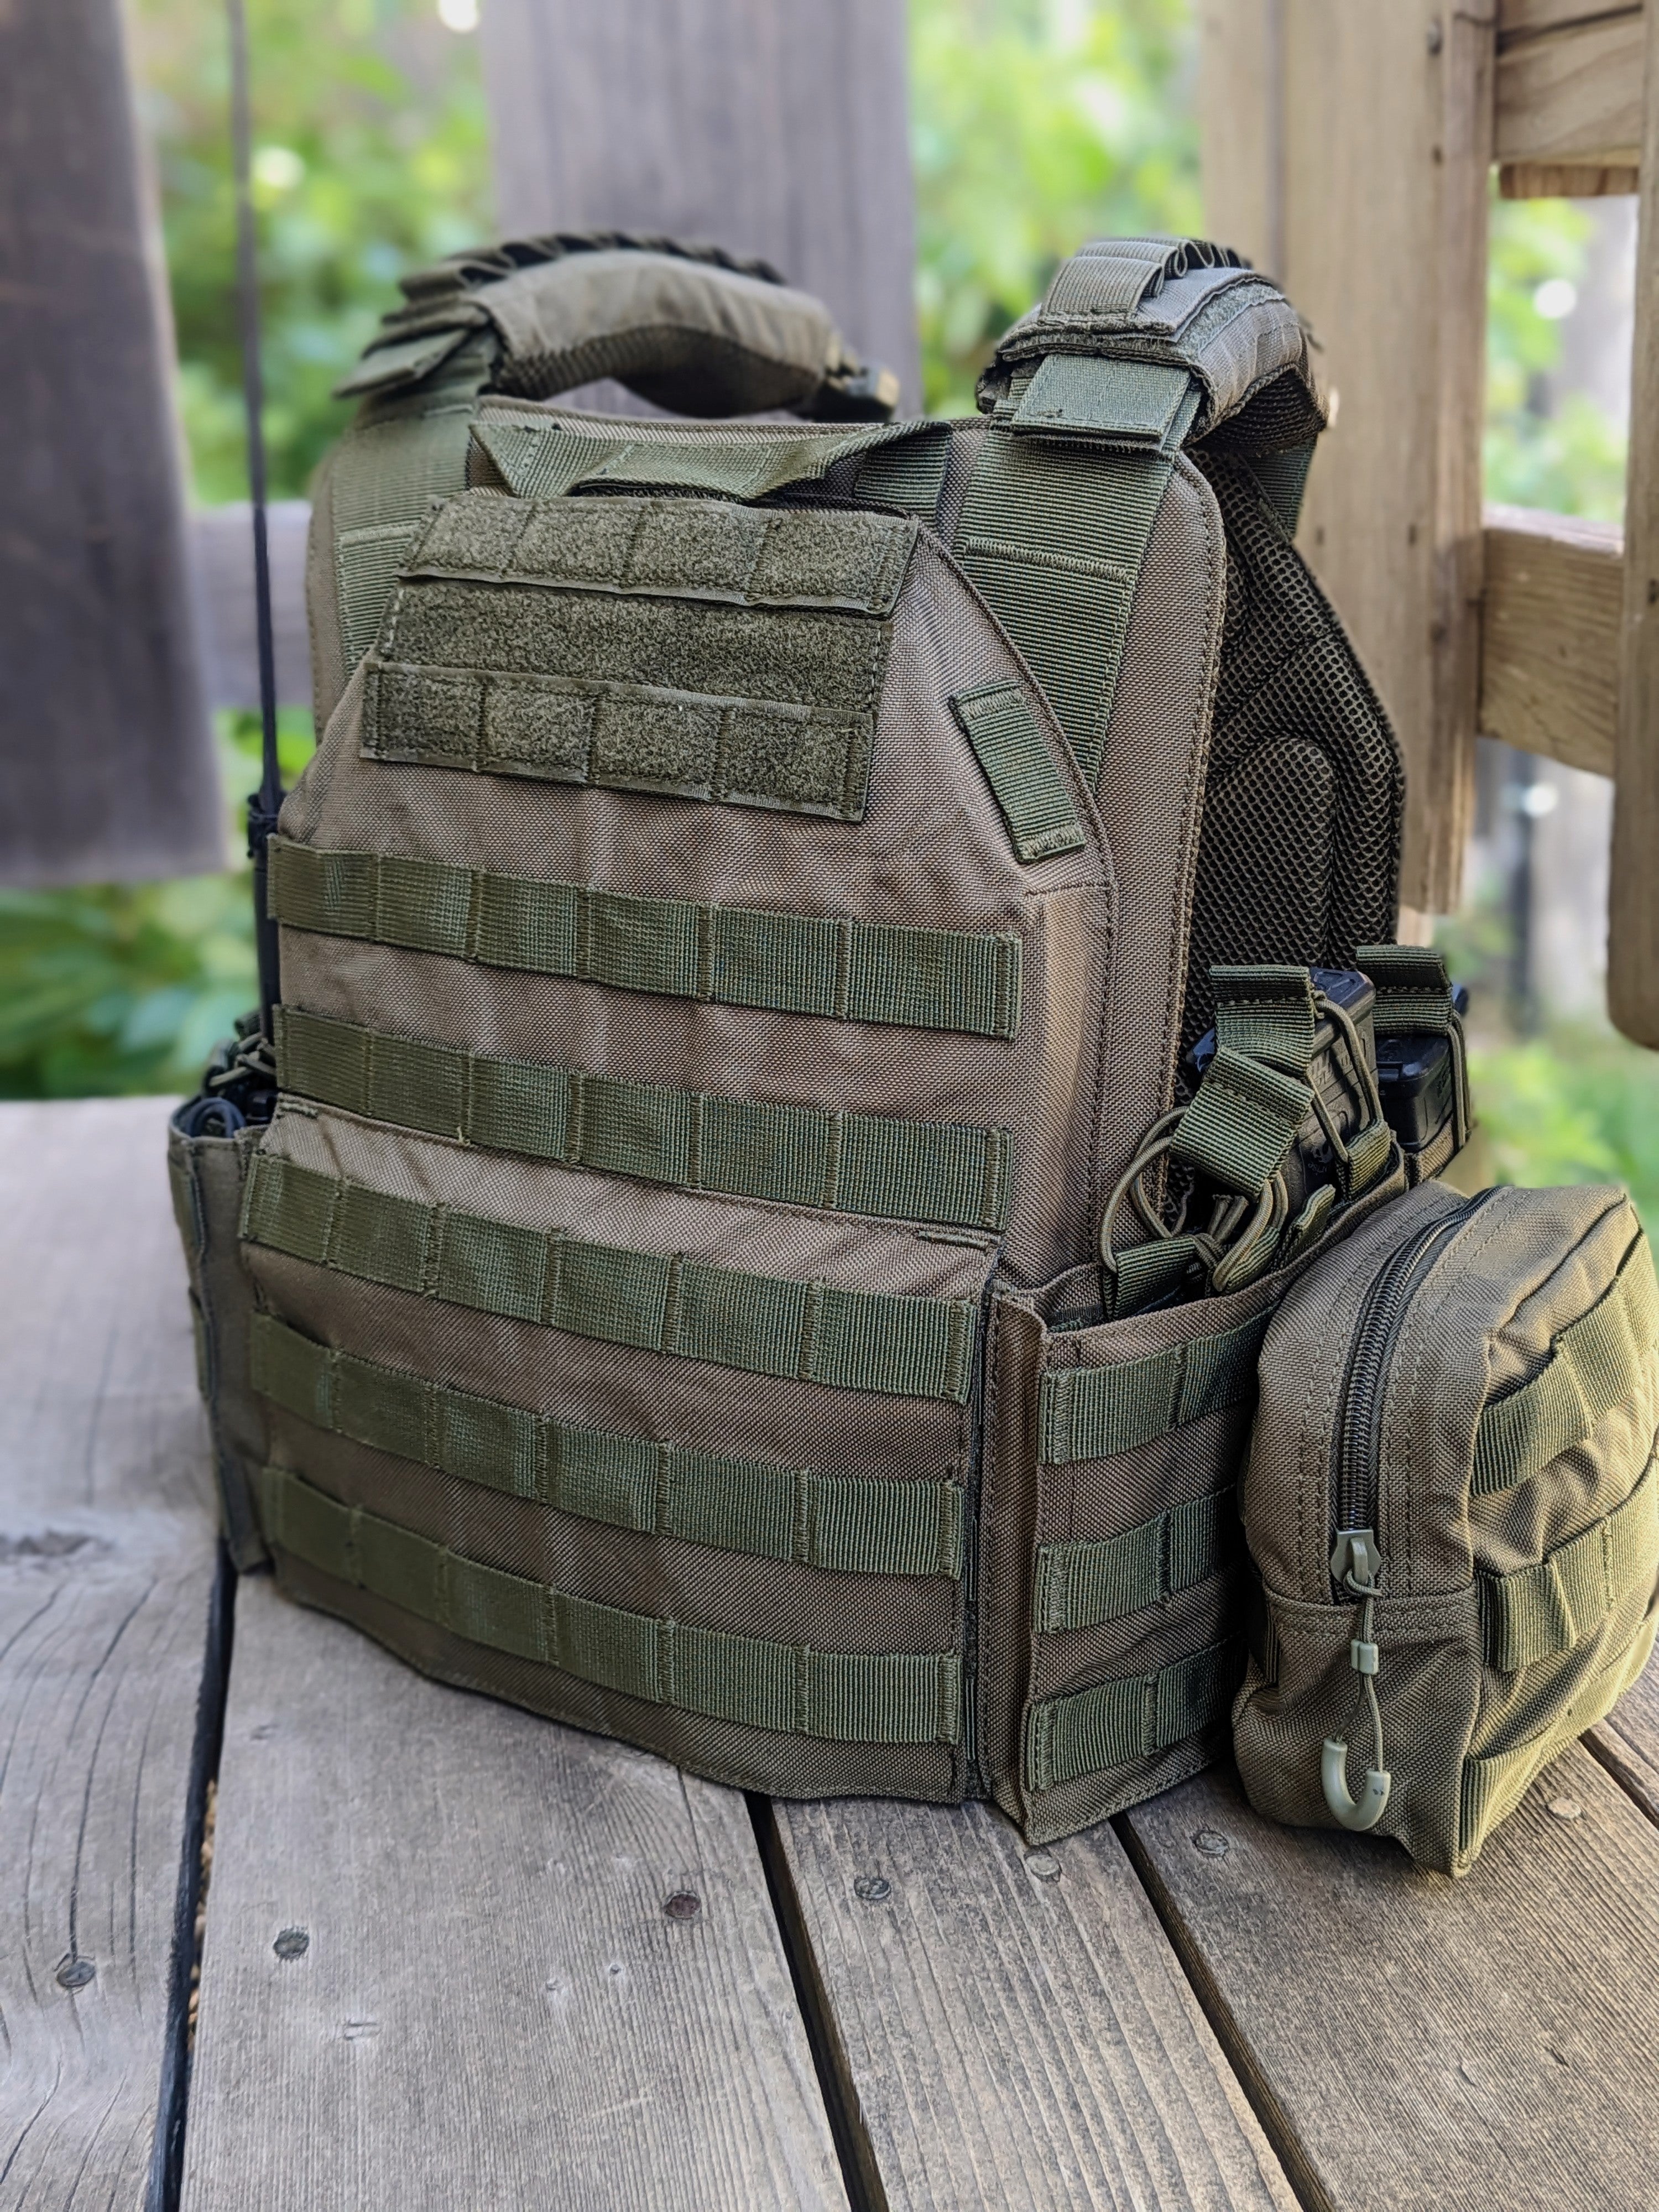 The YK-1 Plate Carrier